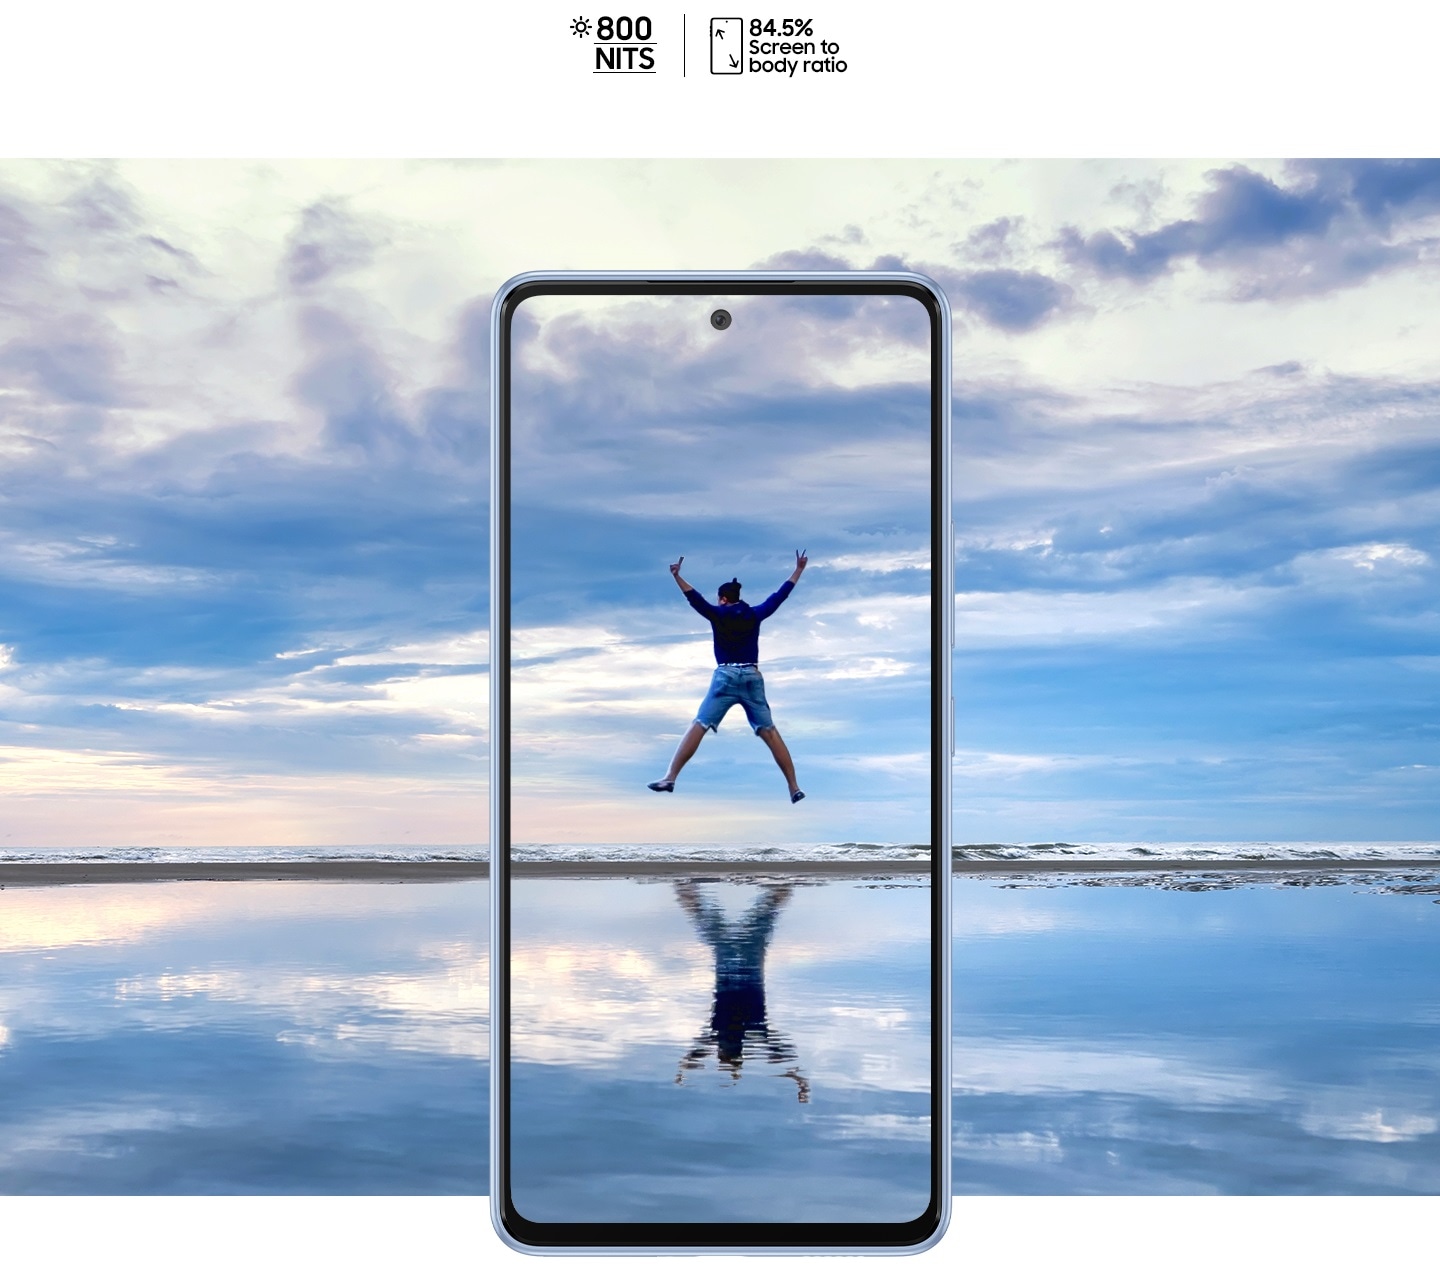 galaxy a53 5g seen from the front against a beautiful landscape that overlaps onto the screen. it shows an expansive sky over water that reflects it with a thin horizon dissecting near the middle. in the center of the screen, a man is jumping in the air with all four limps outstretched and his reflection is shown on the water.